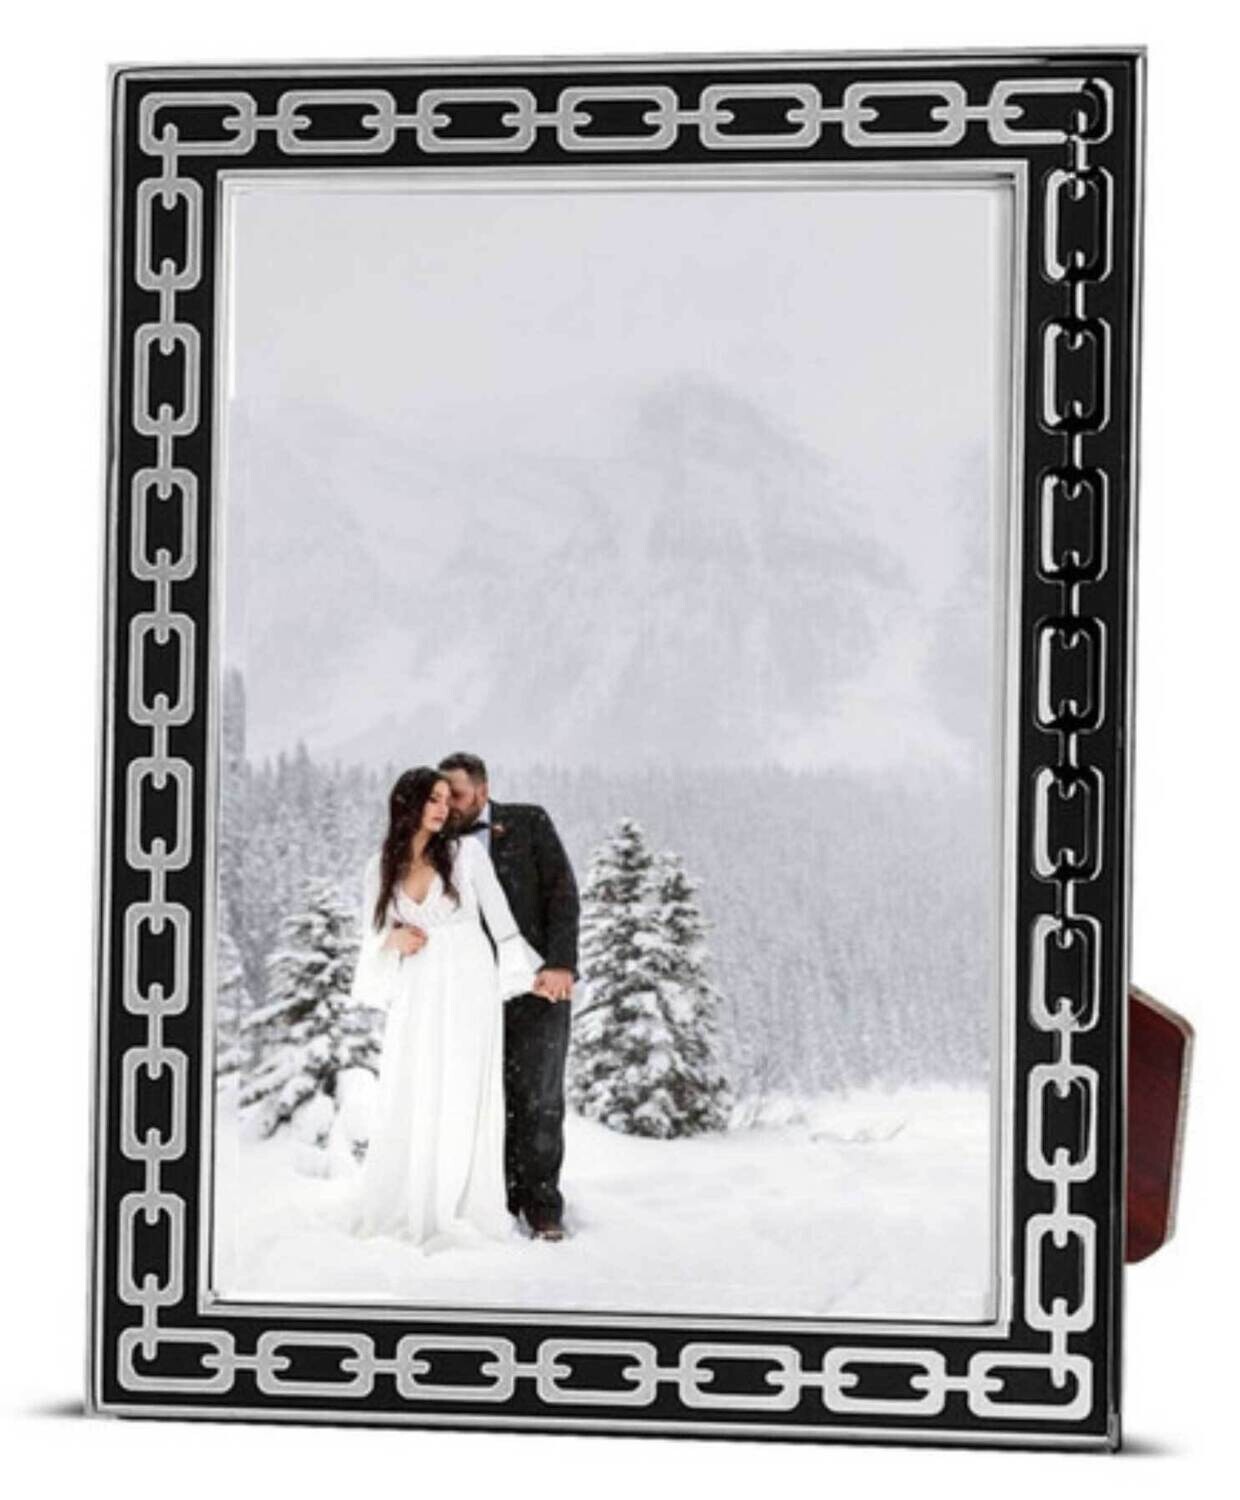 Cunill Links 5x7 Inch Picture Frame Black Silverplated & Enamel 42457BK